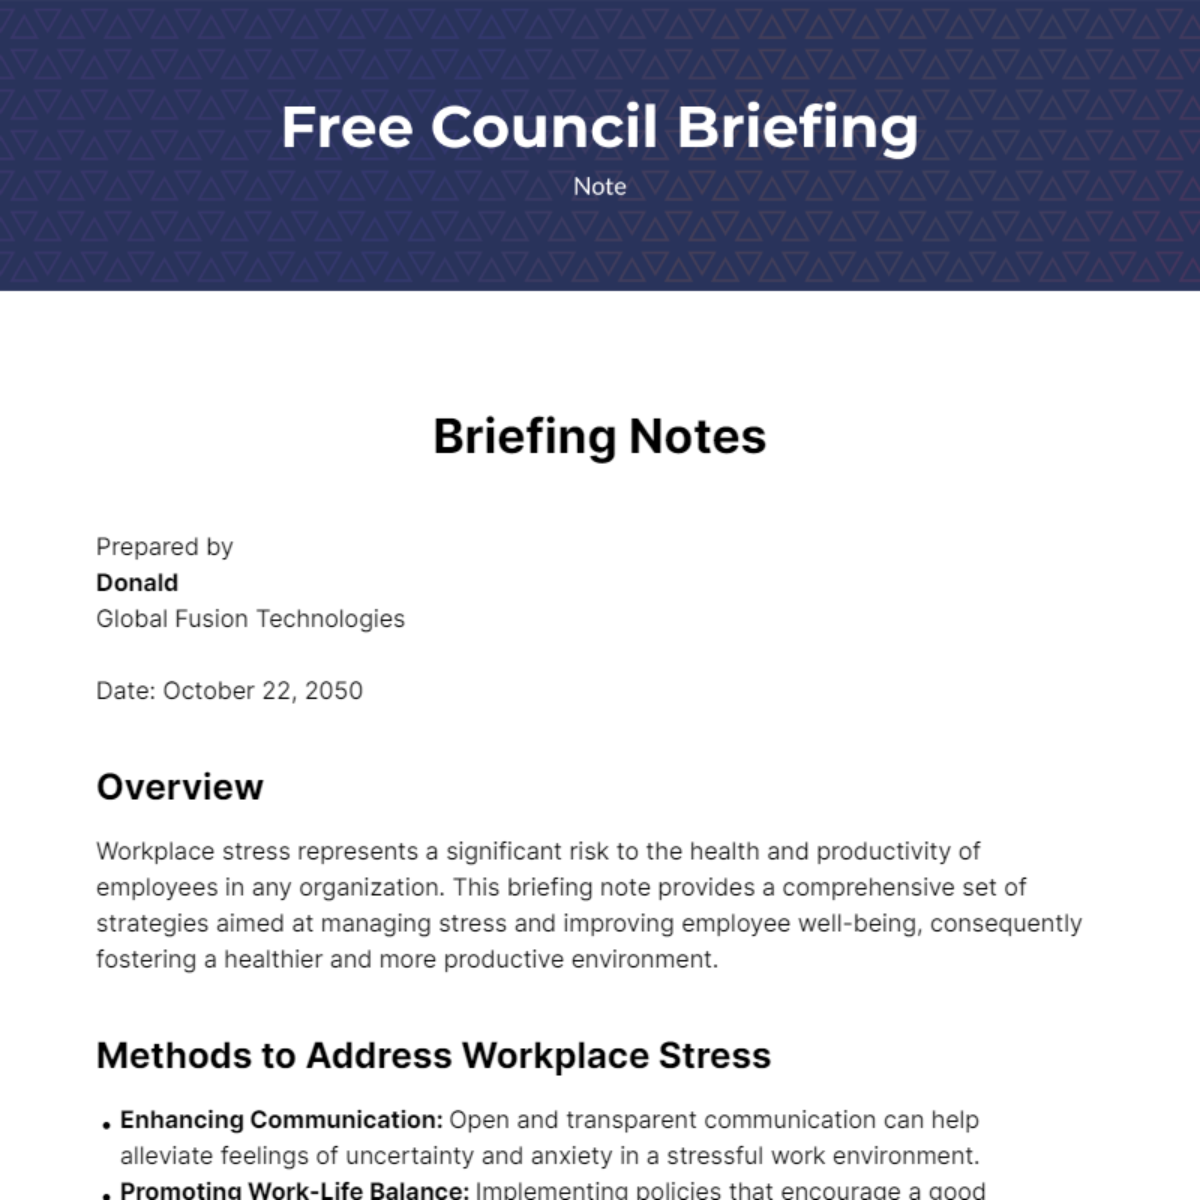 Free Council Briefing Note Template